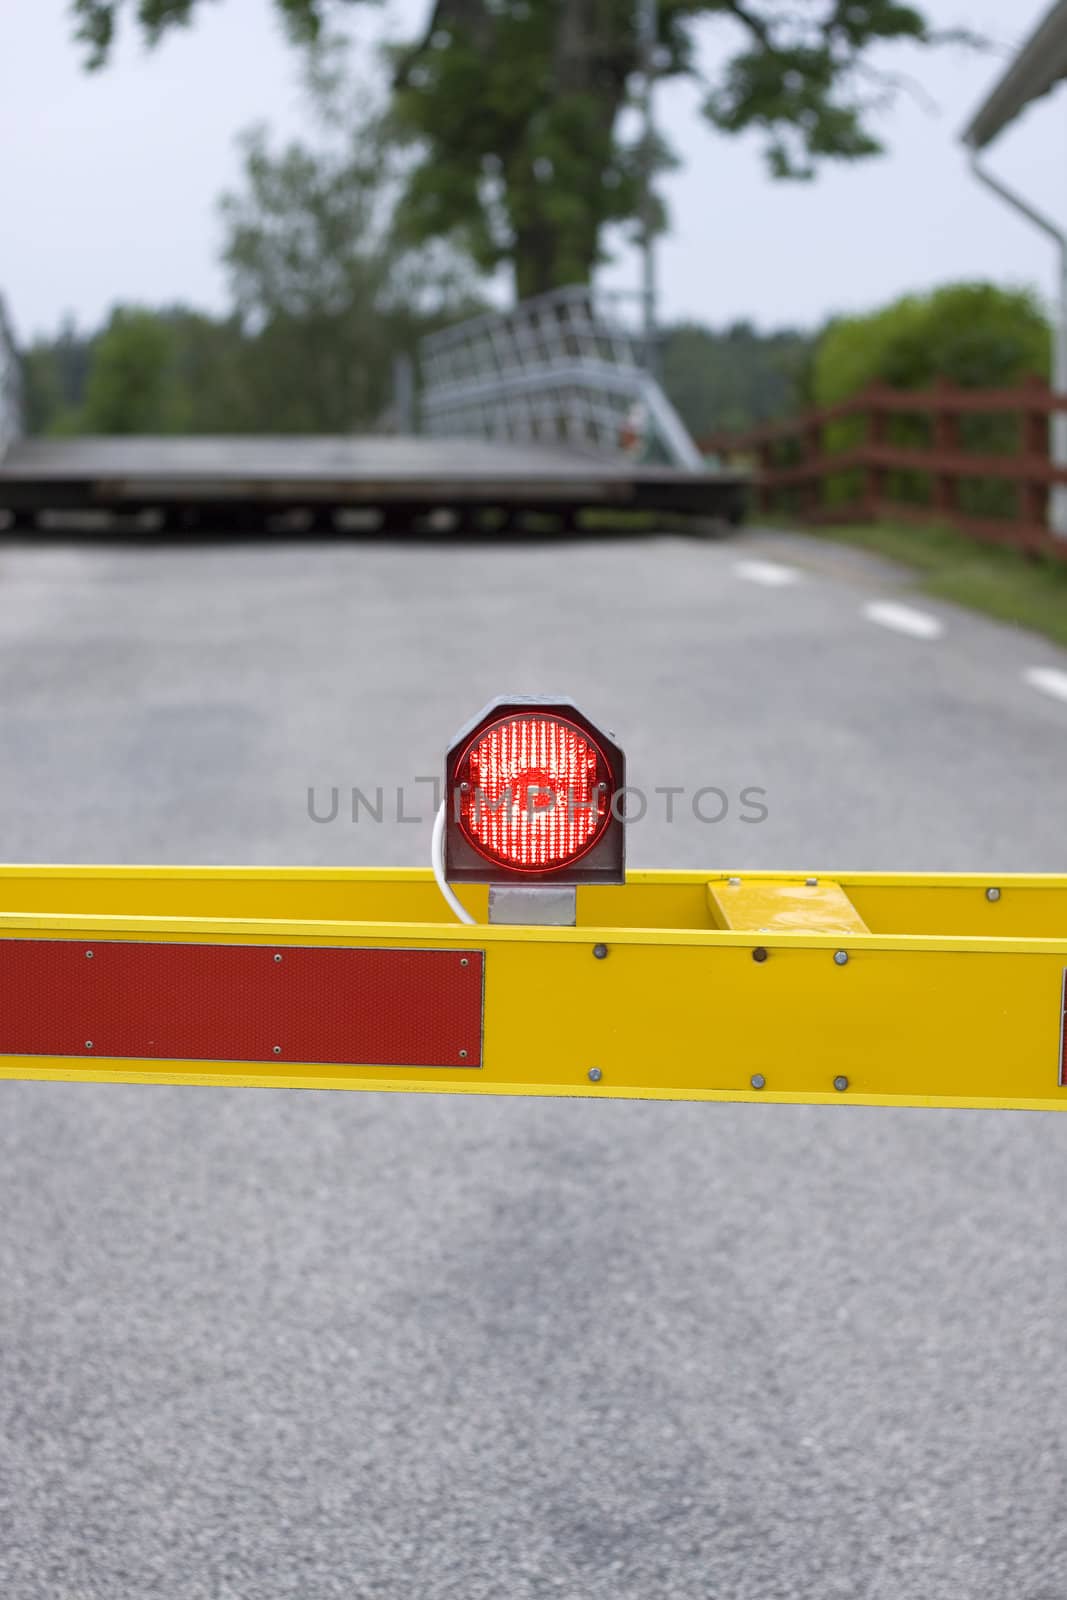 A red flashing light on a road barrier